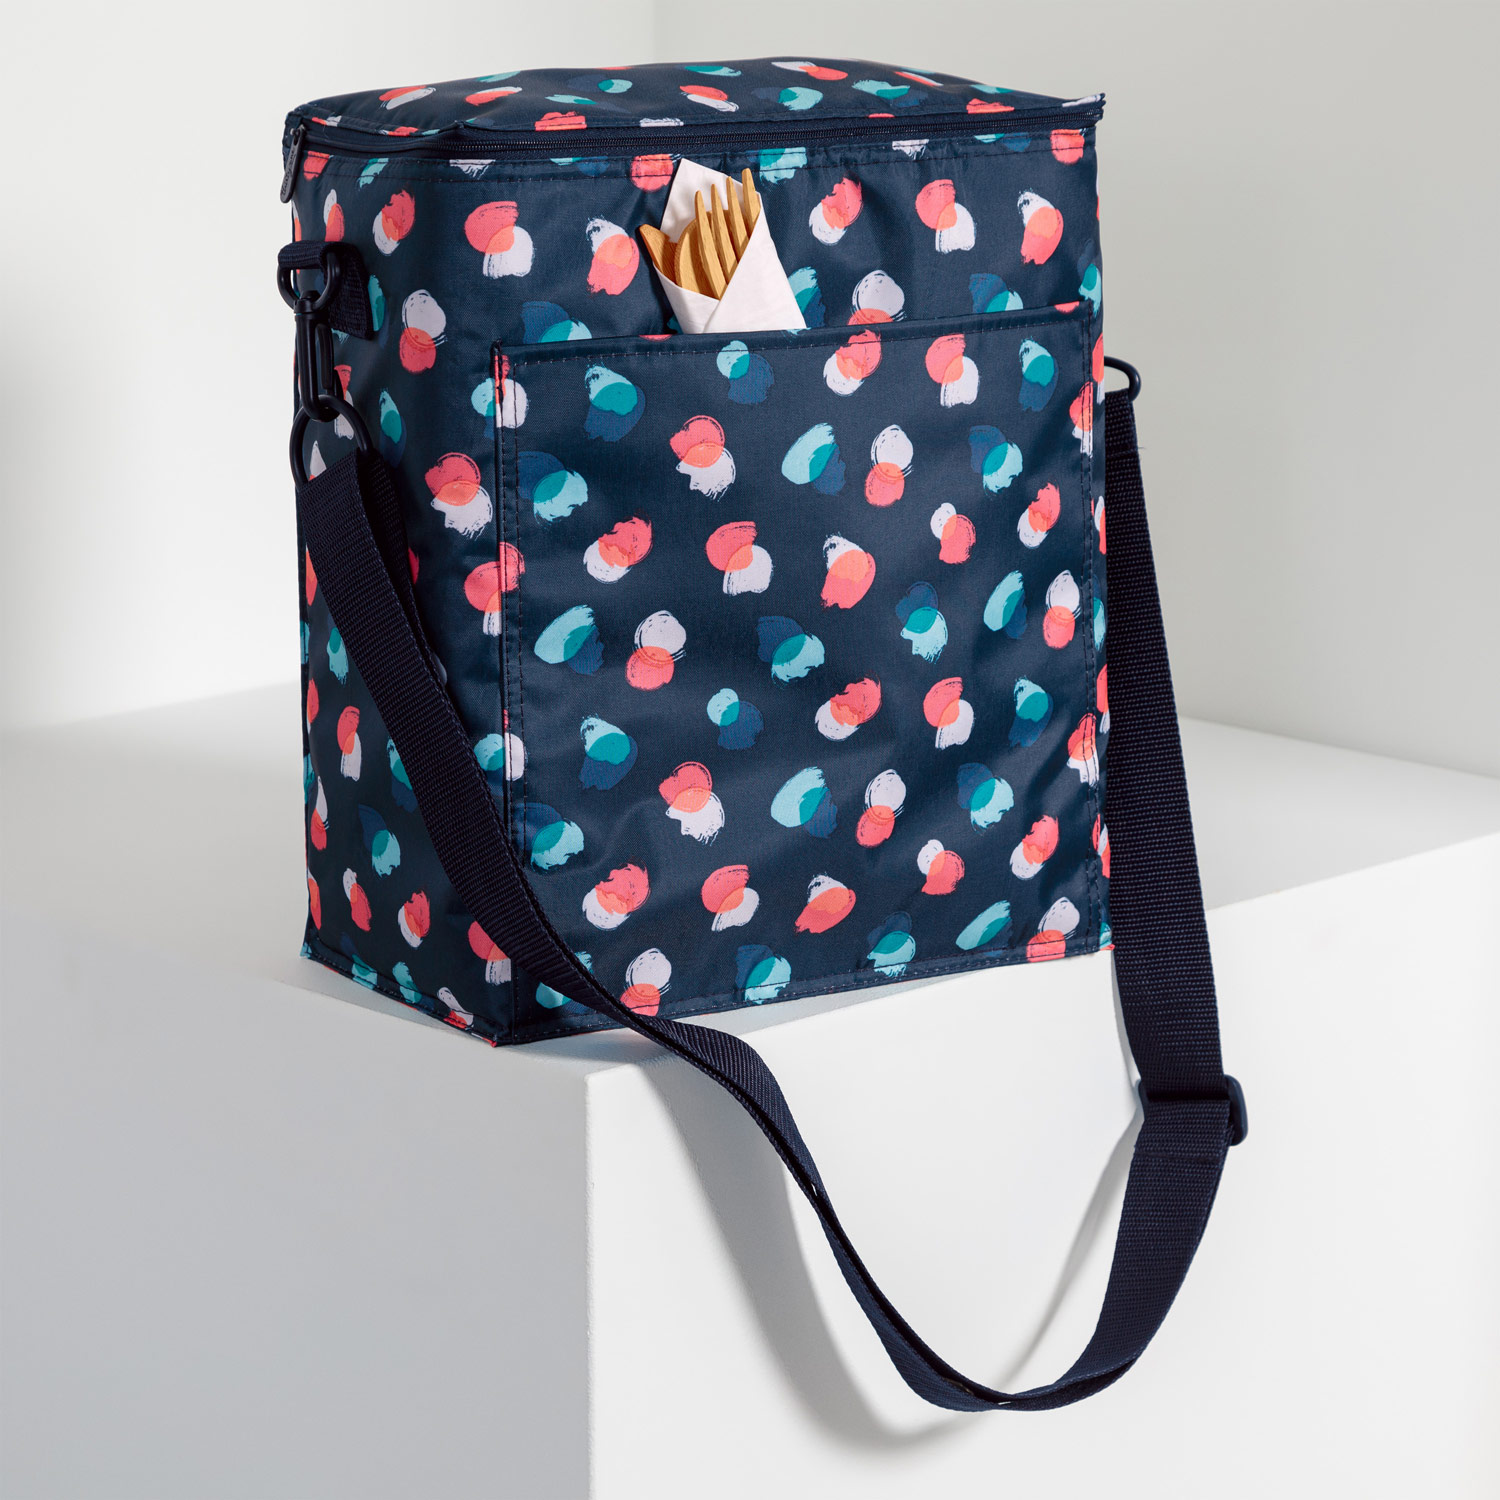 New Thirty One Lunch Break Thermal picnic tote storage bag 31 gift more designs